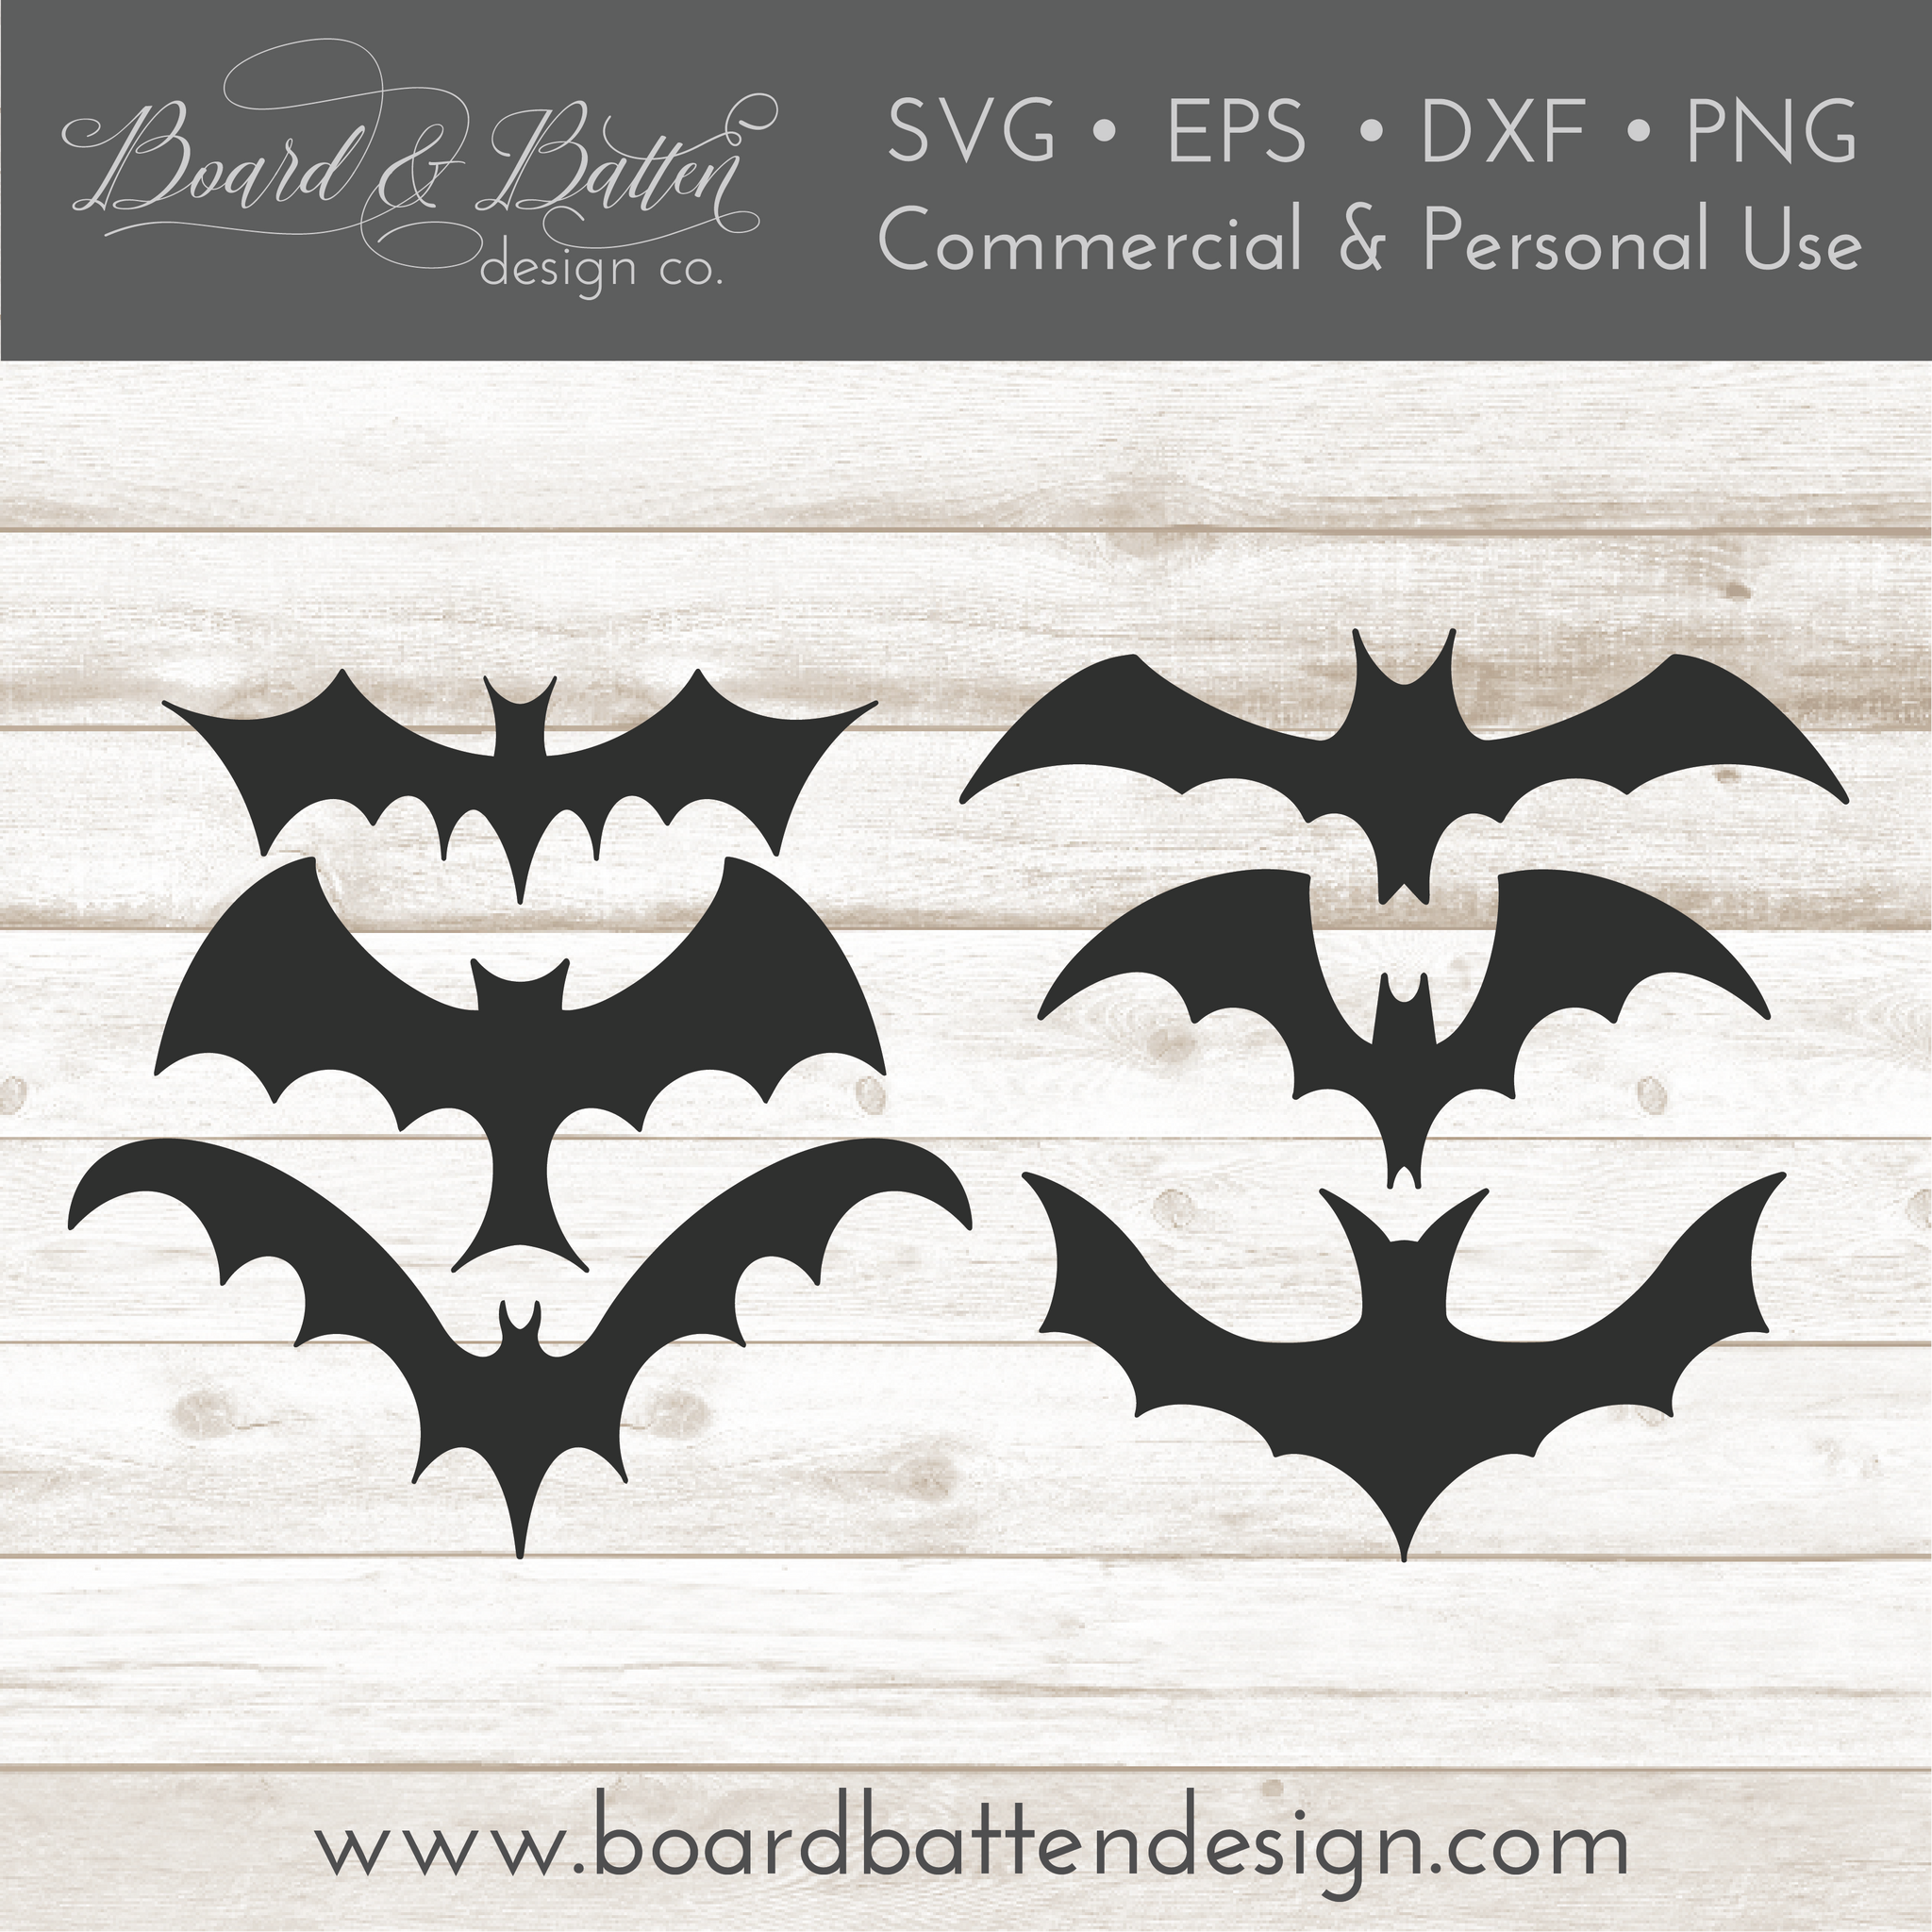 Spooky Bats SVG File Set for Halloween | Cricut & Silhouette Files - Commercial Use SVG Files for Cricut & Silhouette